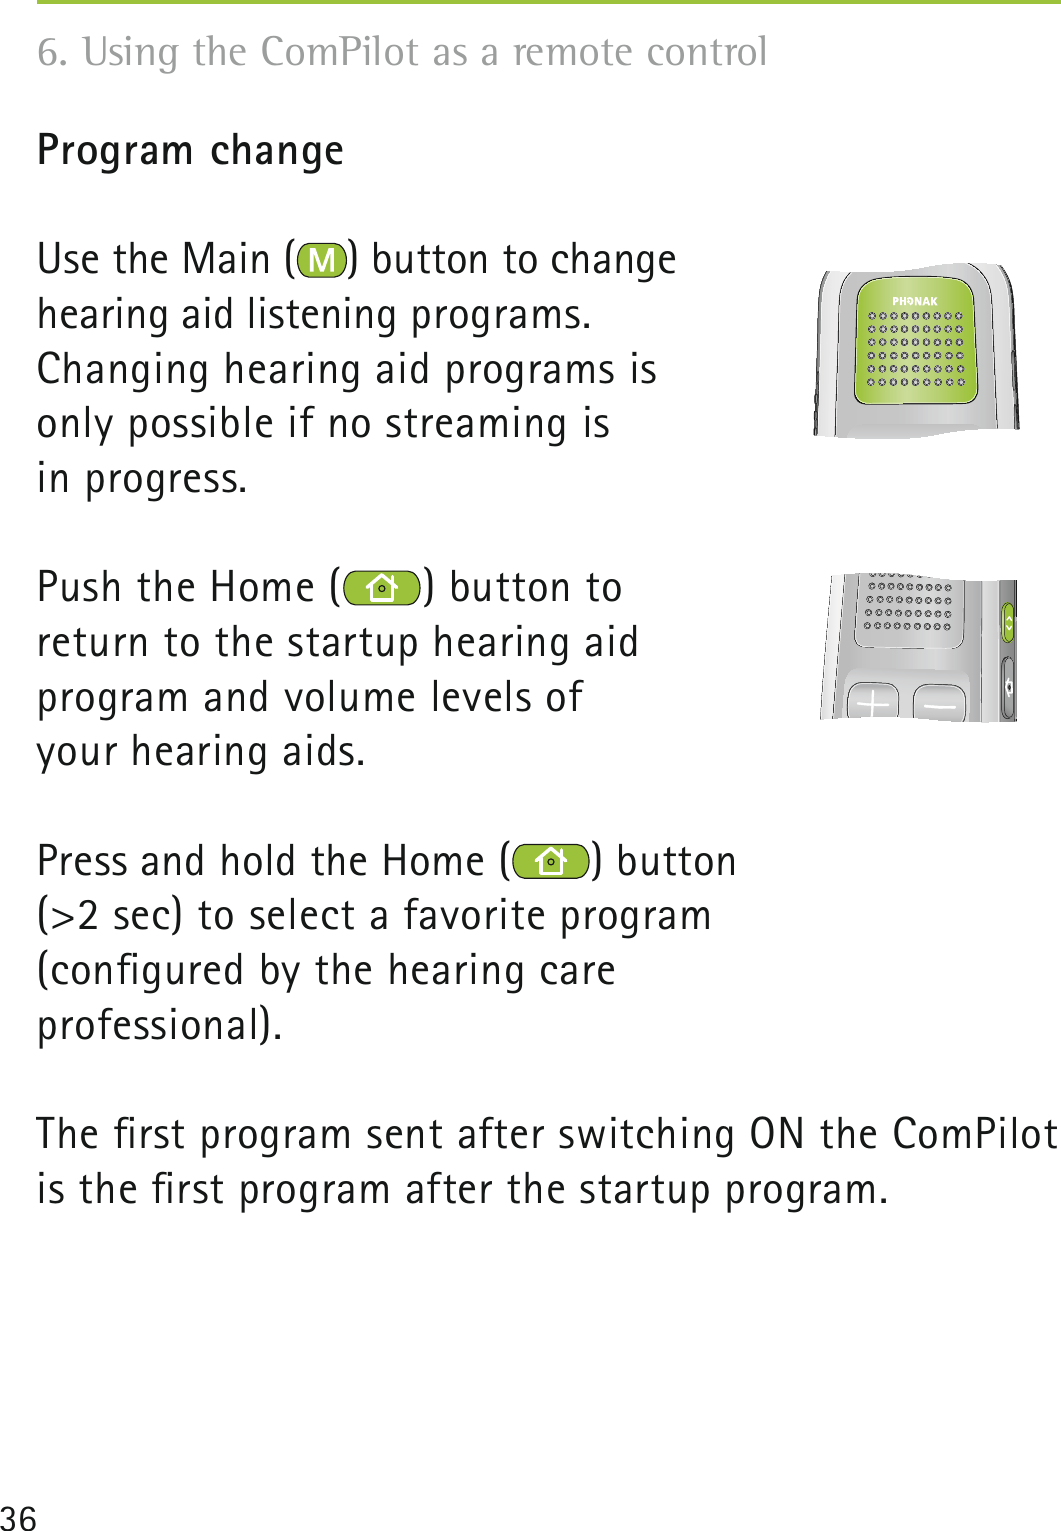 36Program changeUse the Main ( ) button to change  hearing aid listening programs.Changing hearing aid programs is  only possible if no streaming is  in progress.Push the Home ( ) button to return to the startup hearing aid program and volume levels of your hearing aids.Press and hold the Home ( ) button (&gt;2 sec) to select a favorite program (conﬁgured by the hearing care professional).The ﬁrst program sent after switching ON the ComPilot is the ﬁrst program after the startup program.    6. Using the ComPilot as a remote control 